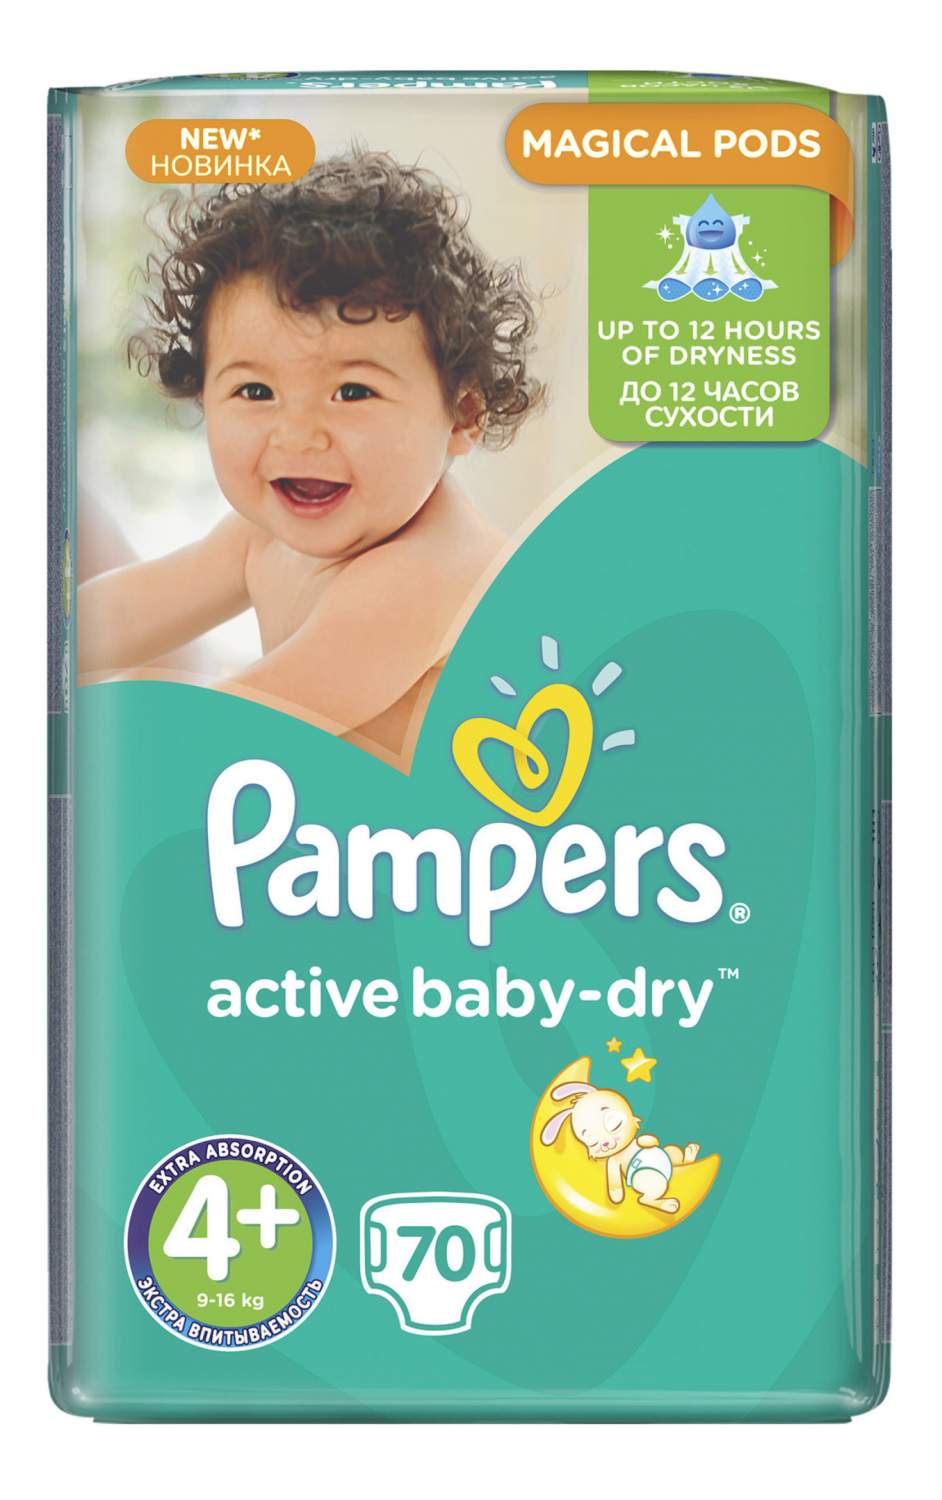 pampers 3 giga pack